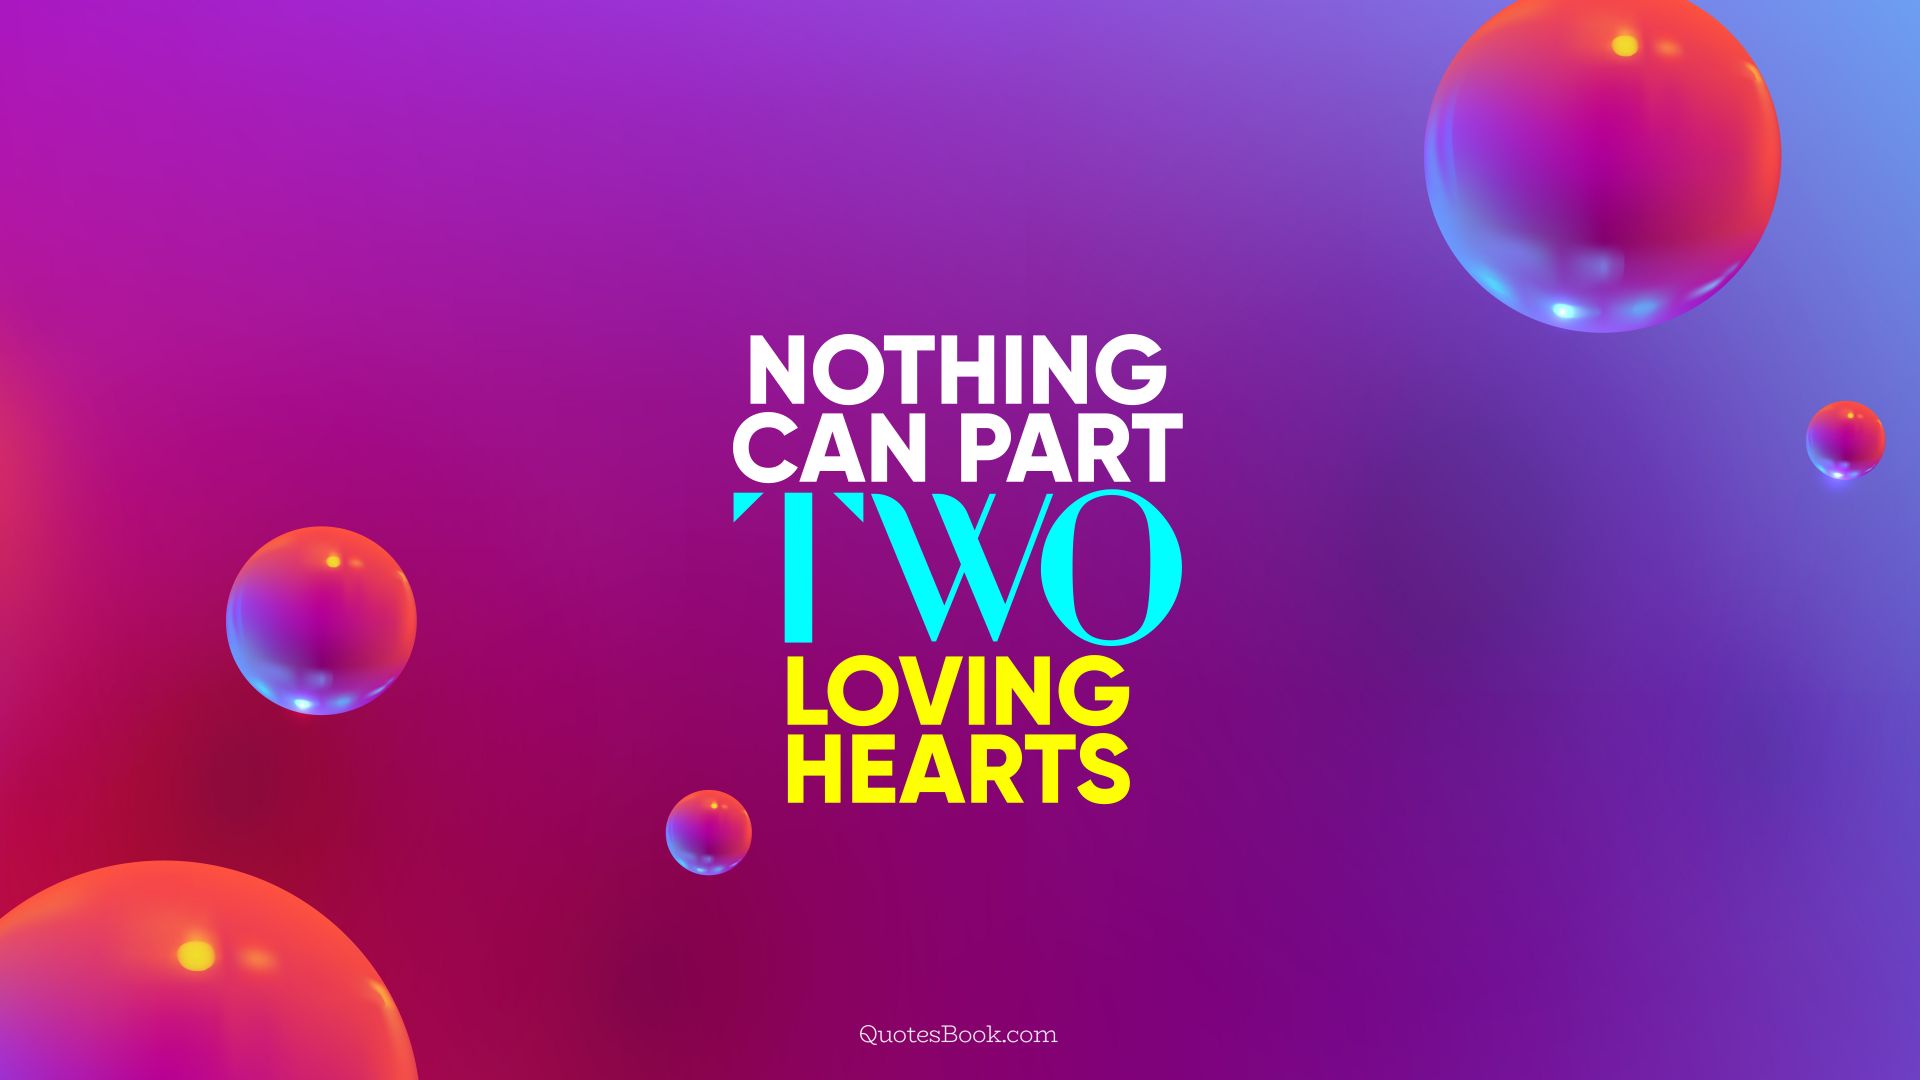 Nothing can part two loving hearts. - Quote by QuotesBook